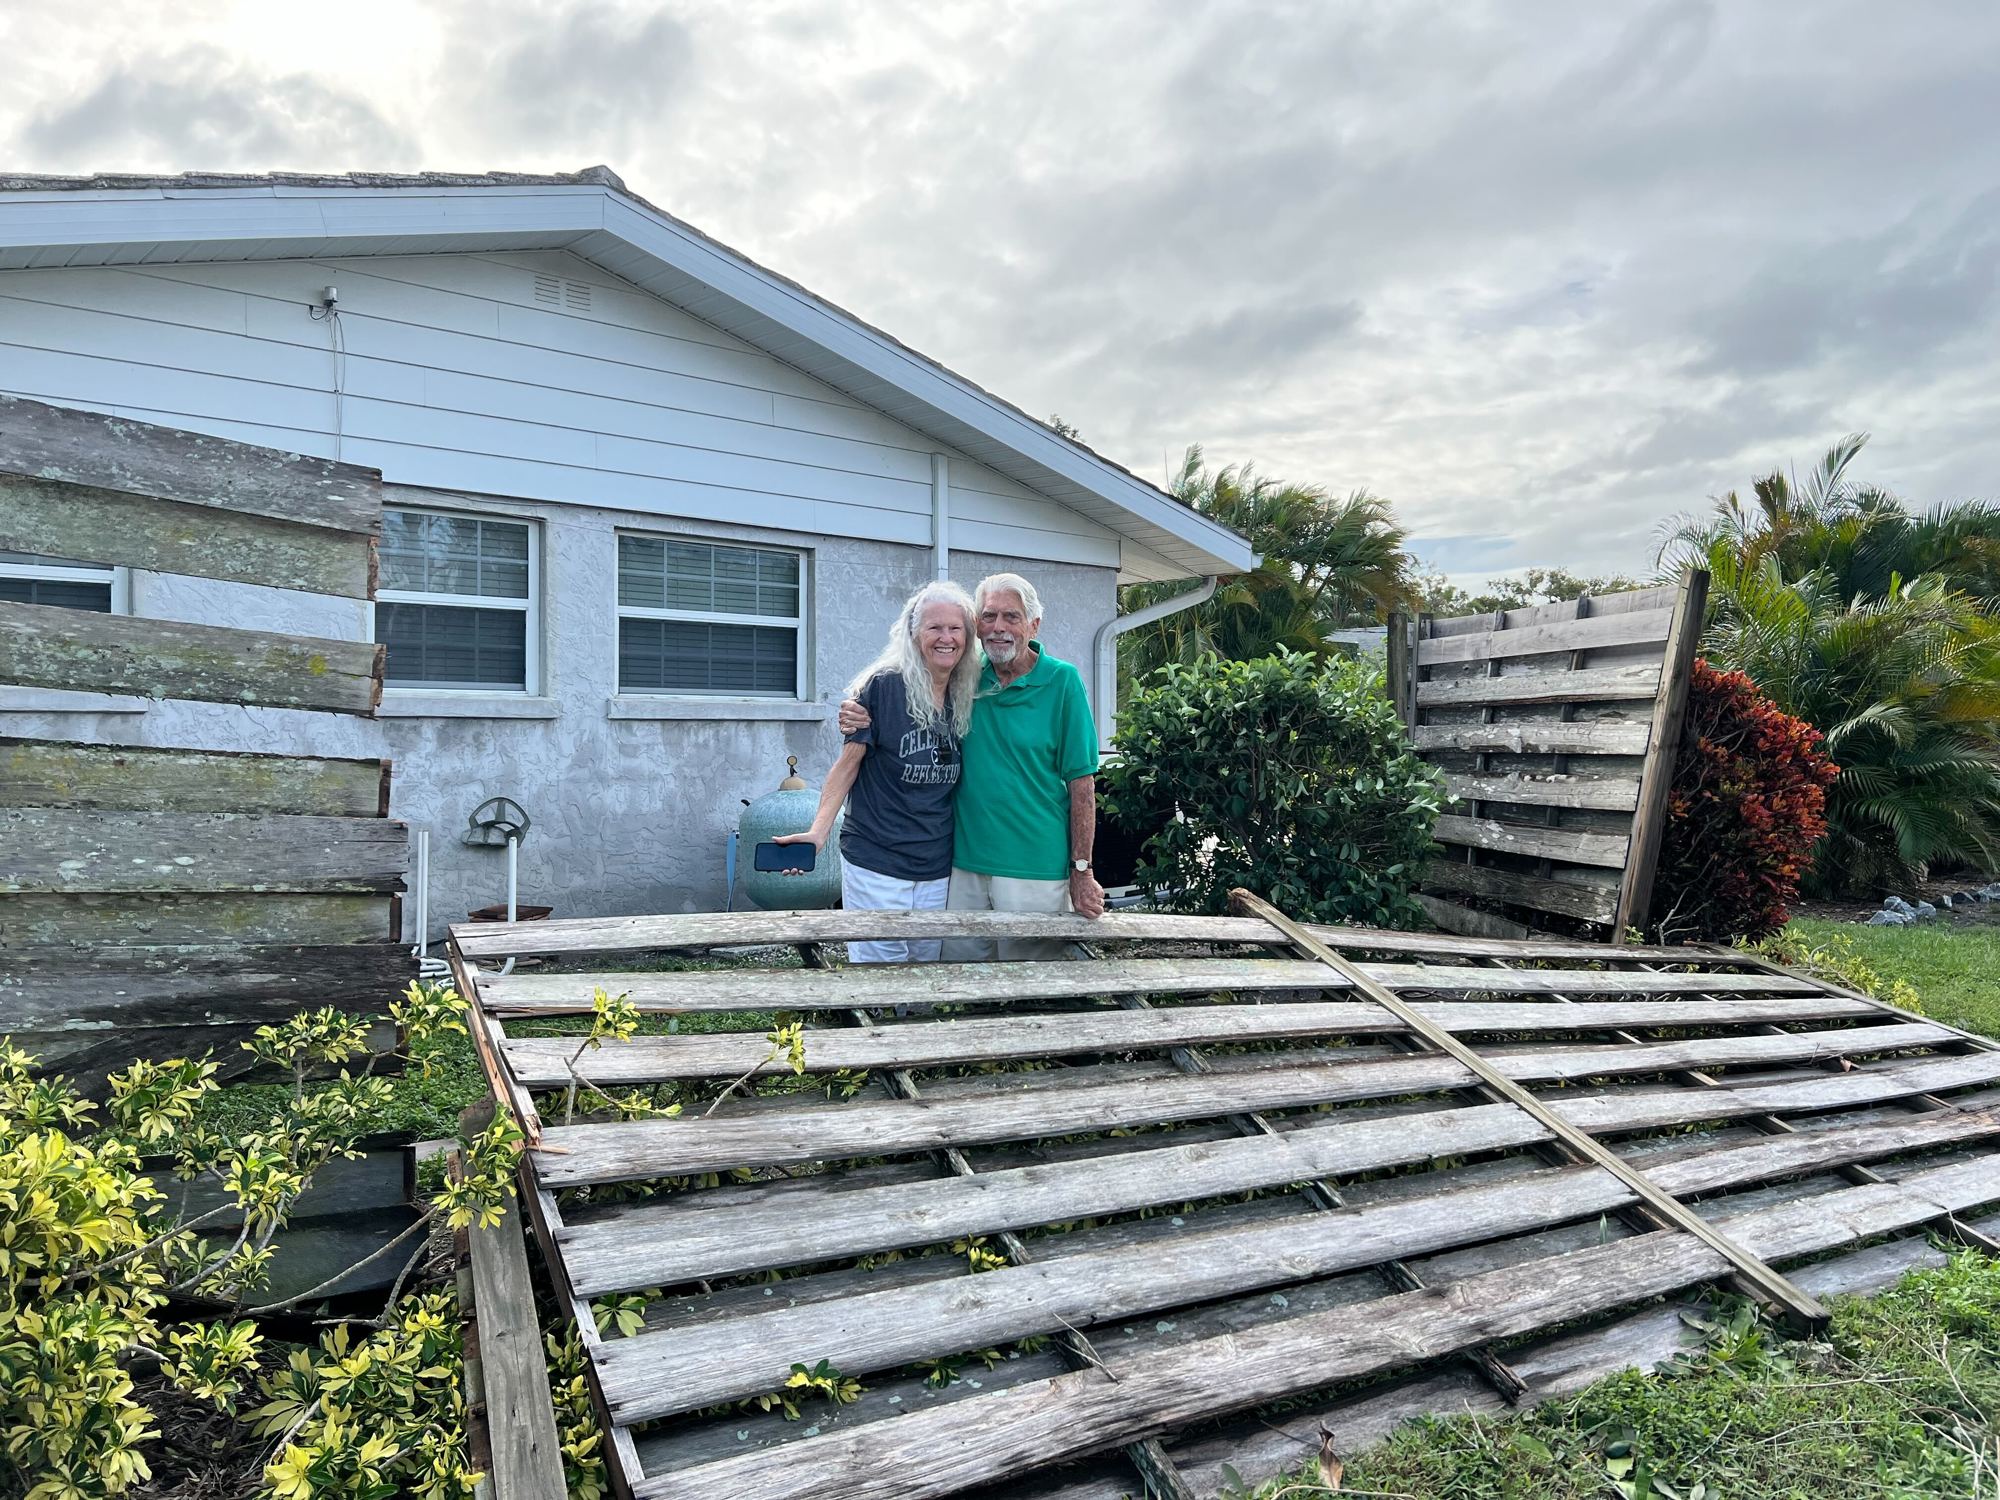 Pat and Hugh Beetham rode out the storm in their son’s house and came back to find their fence down in South Gatre. (Photo by Kat Hughes)